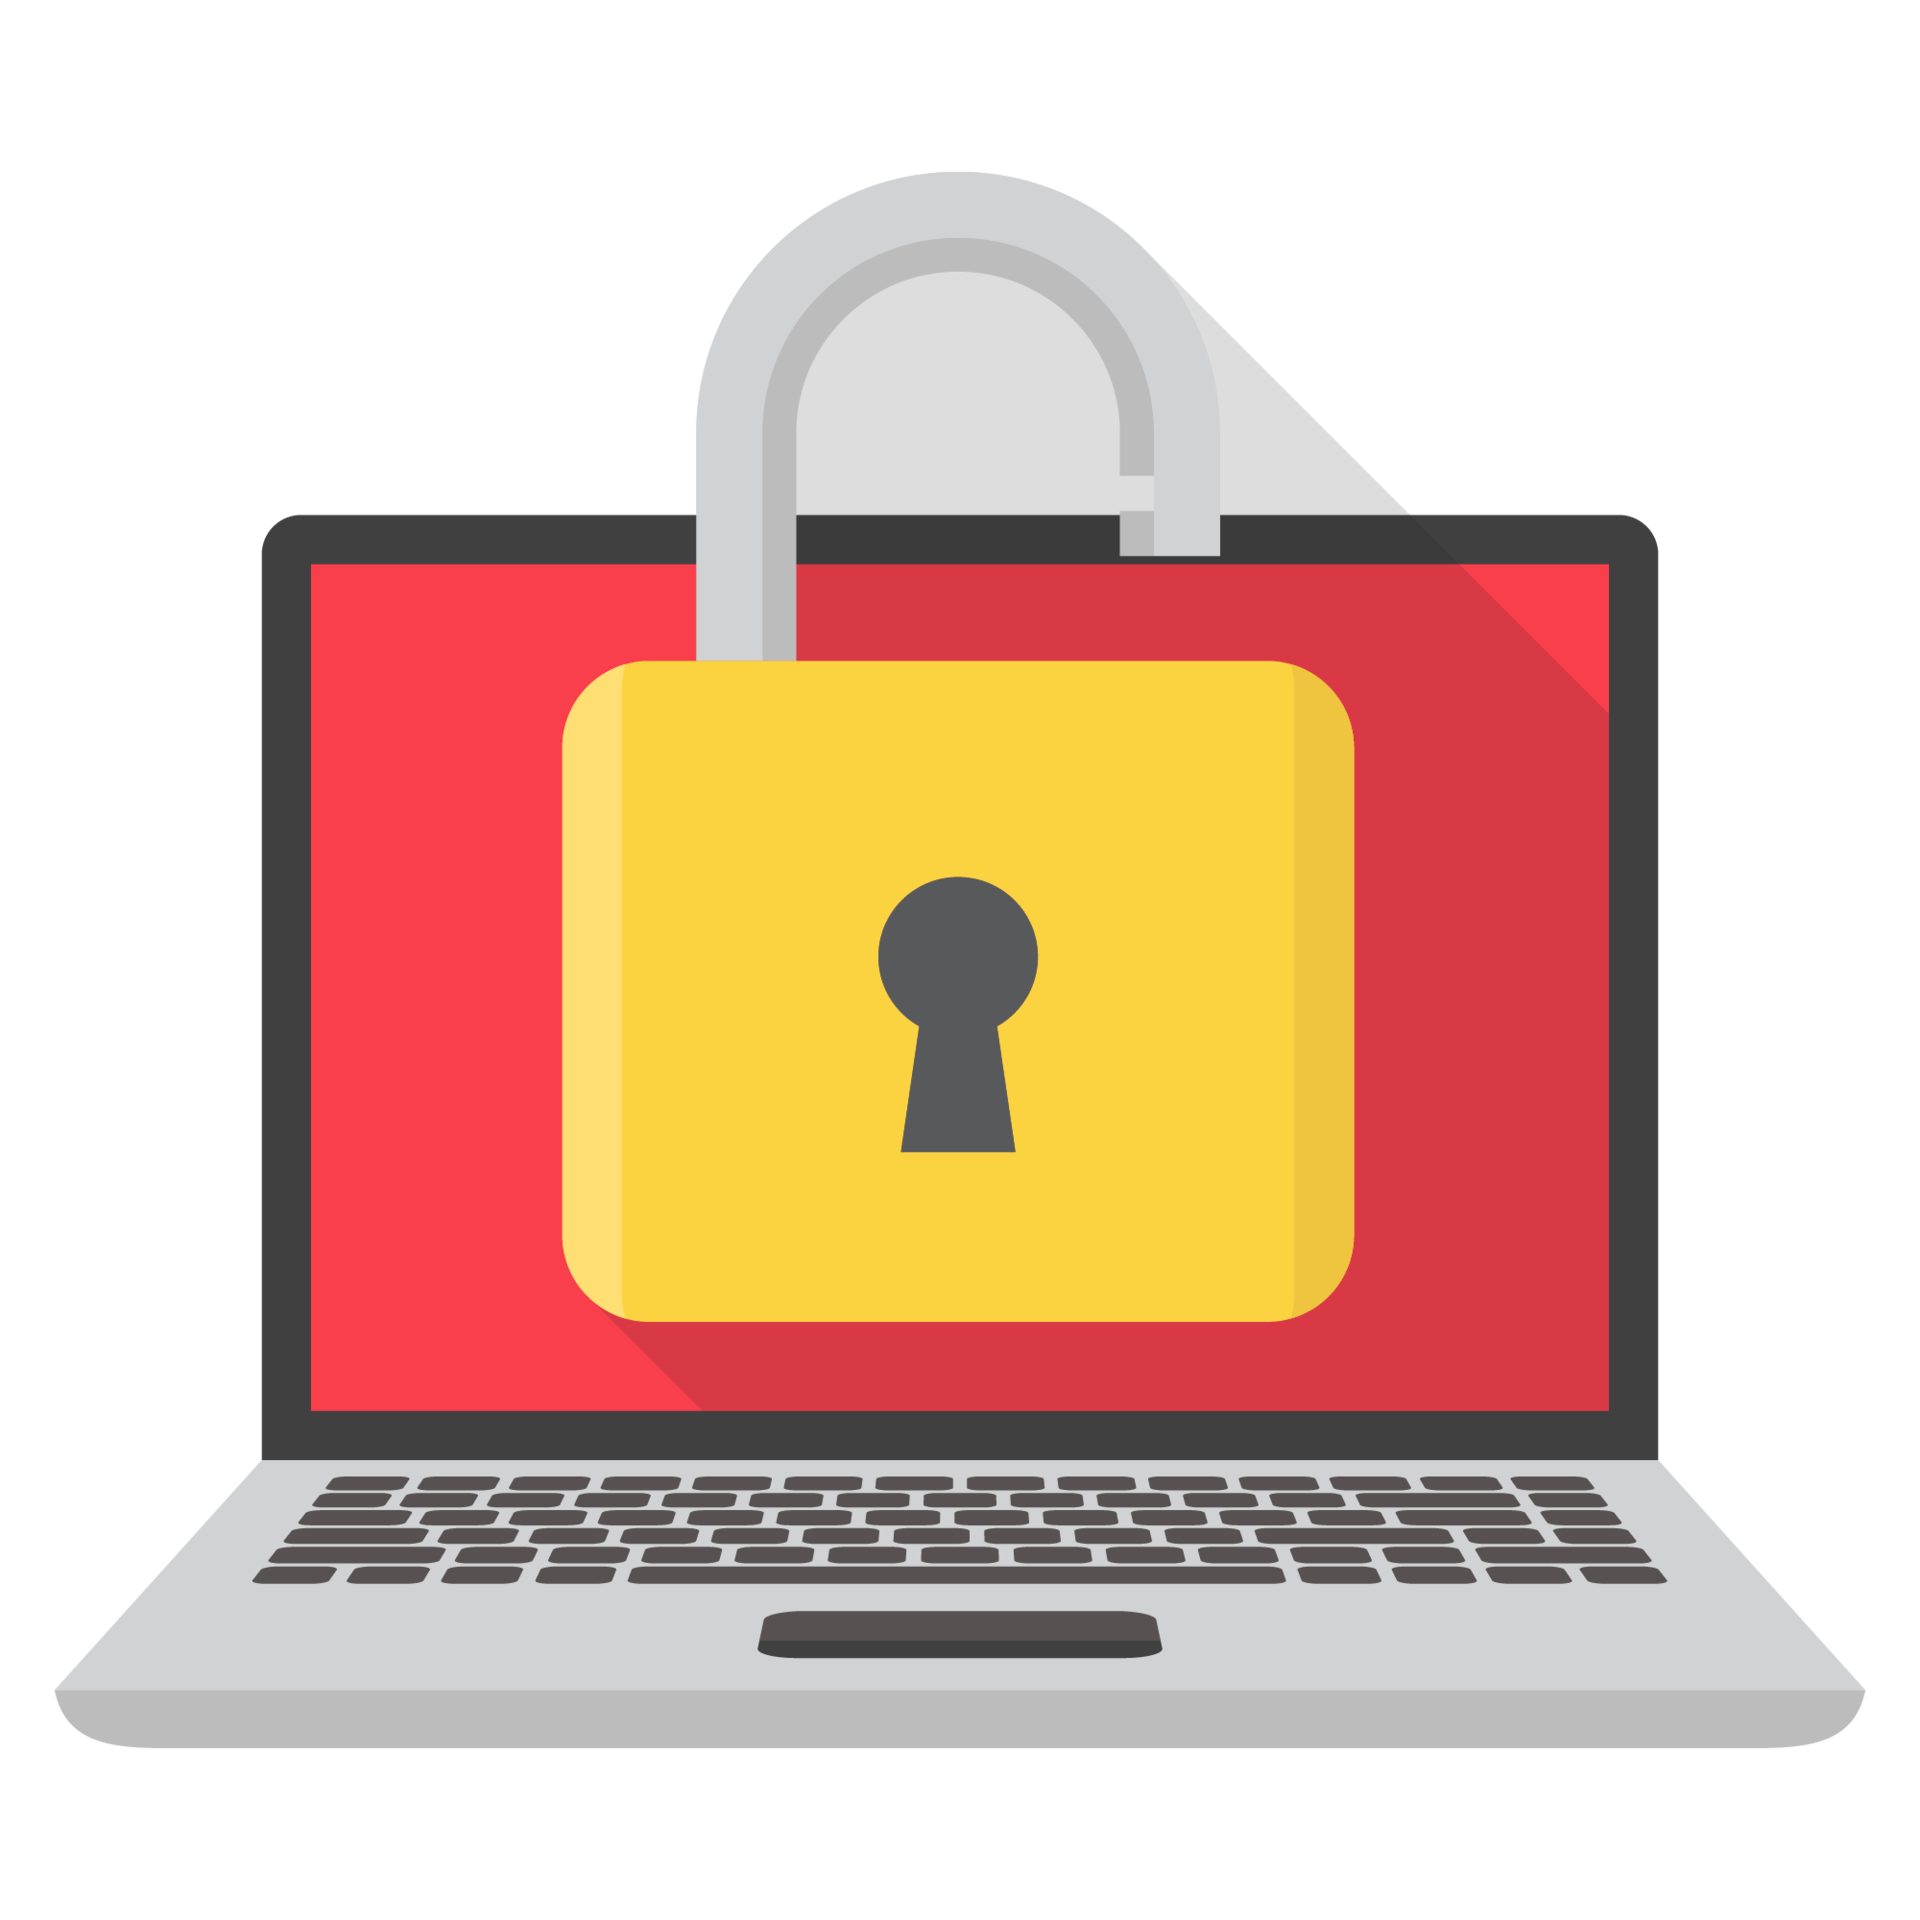 Free Laptop and padlock, laptop unlock security data transparent background  11809165 PNG with Transparent Background